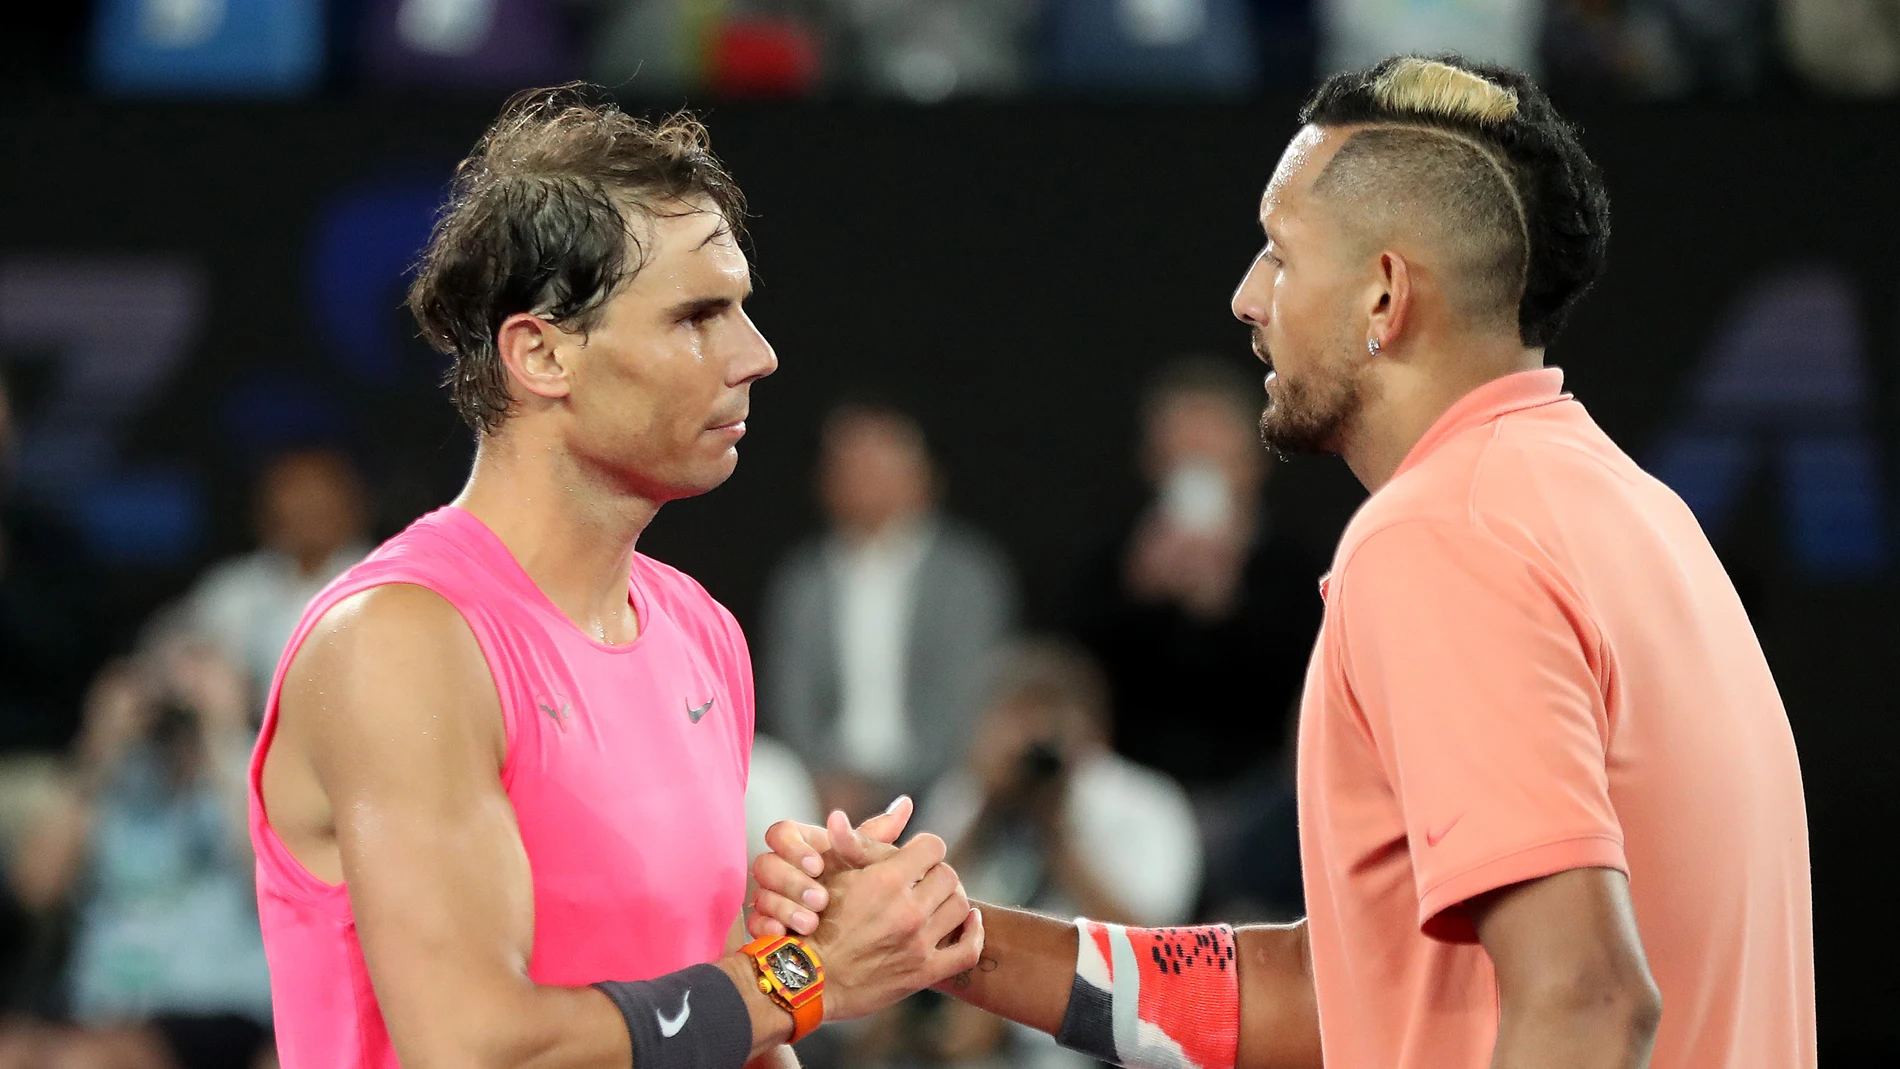 Kyrgios' girlfriend begins attacks on Rafa Nadal with the semifinals within reach
